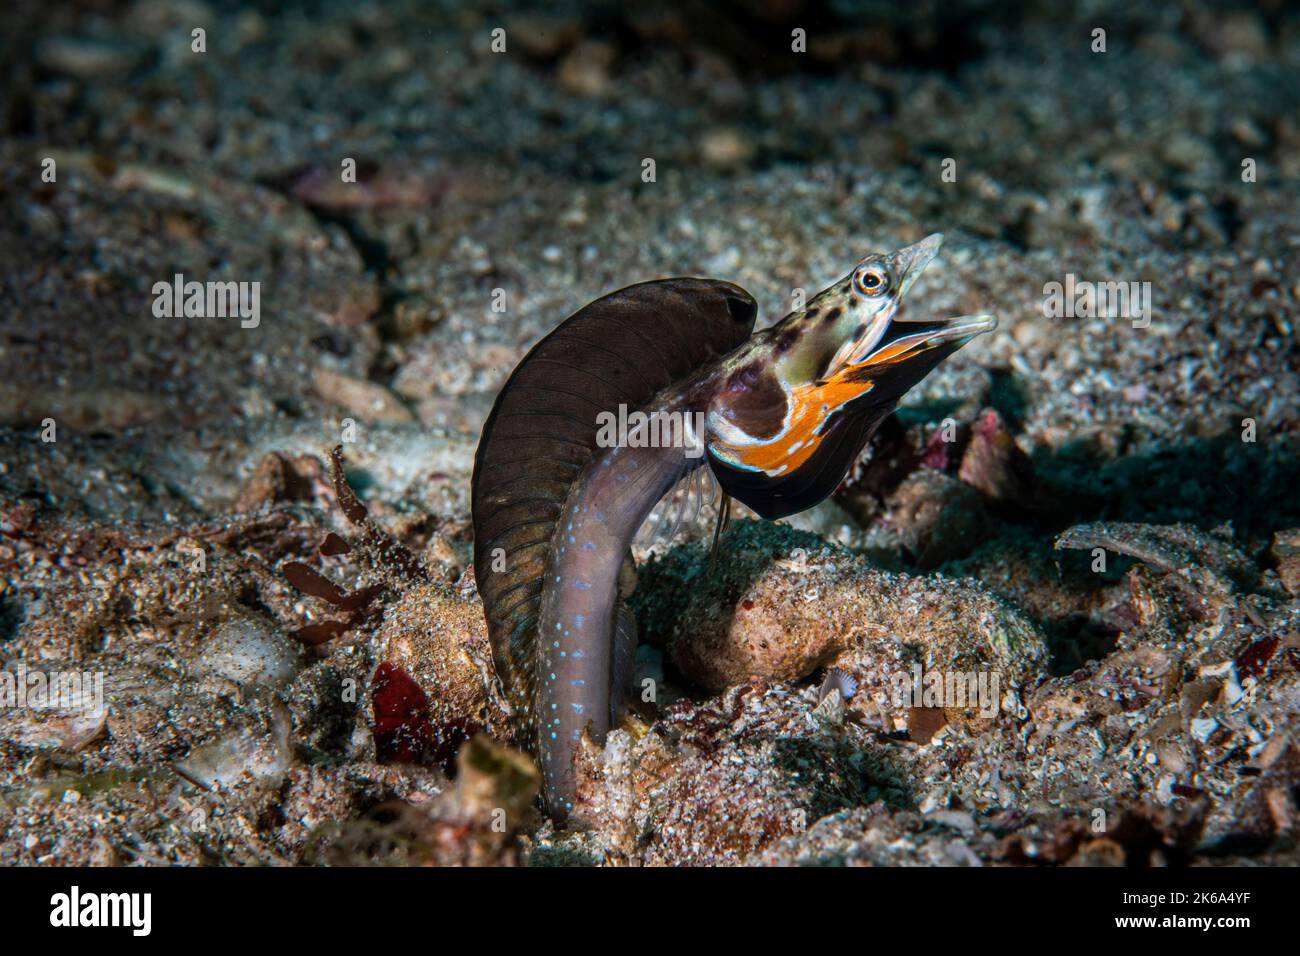 An orangethroat pike blenny displays its colors to attract a mate, Sea of Cortez, Mexico. Stock Photo